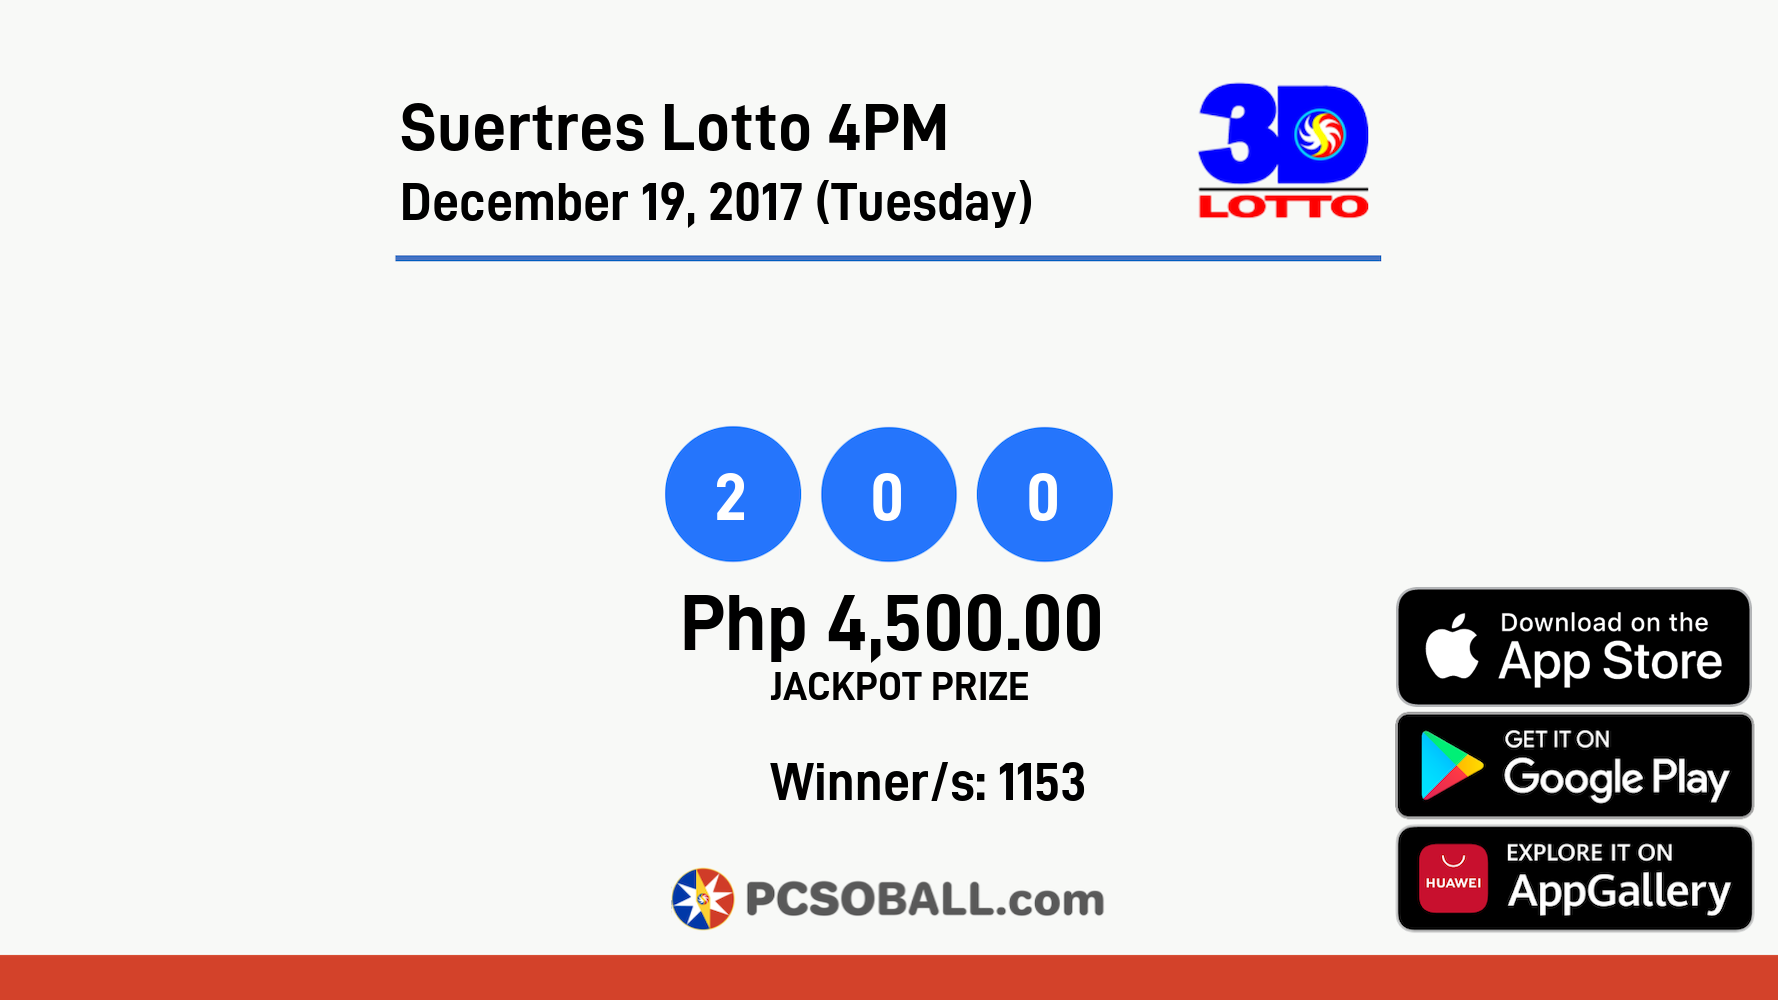 Suertres Lotto 4PM December 19, 2017 (Tuesday) Result